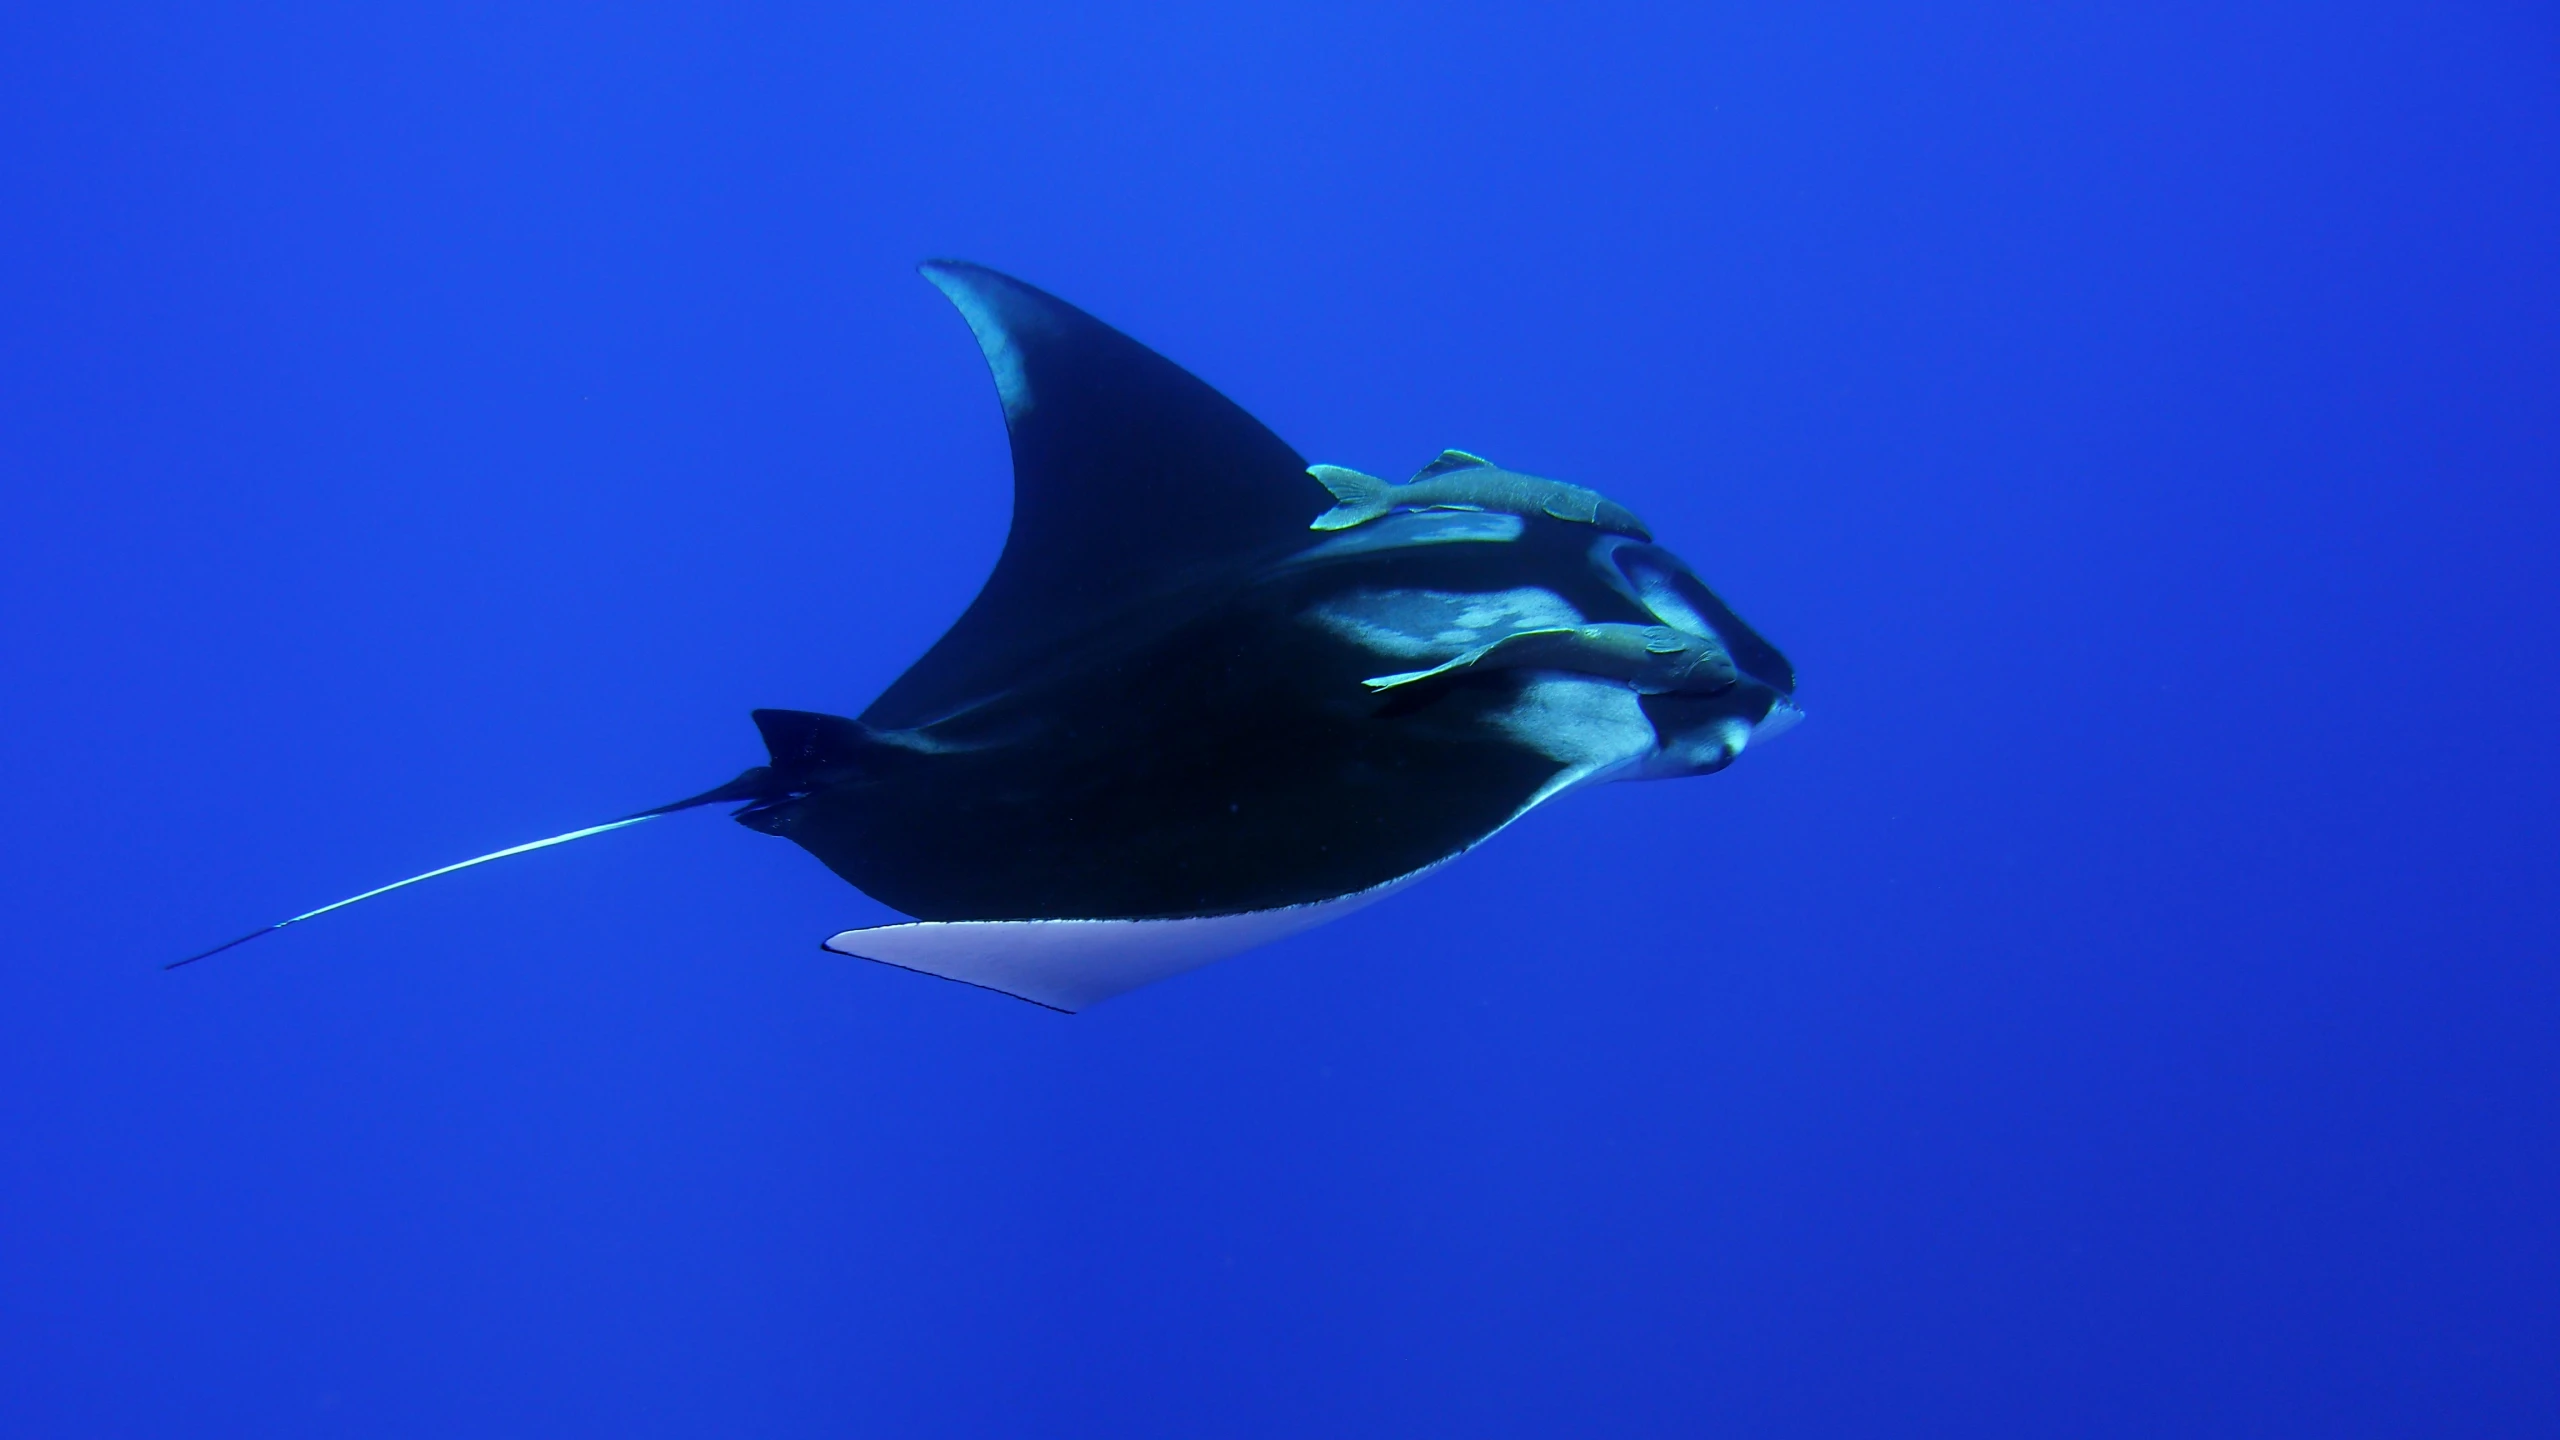 the tail of a manta ray swimming through the blue water